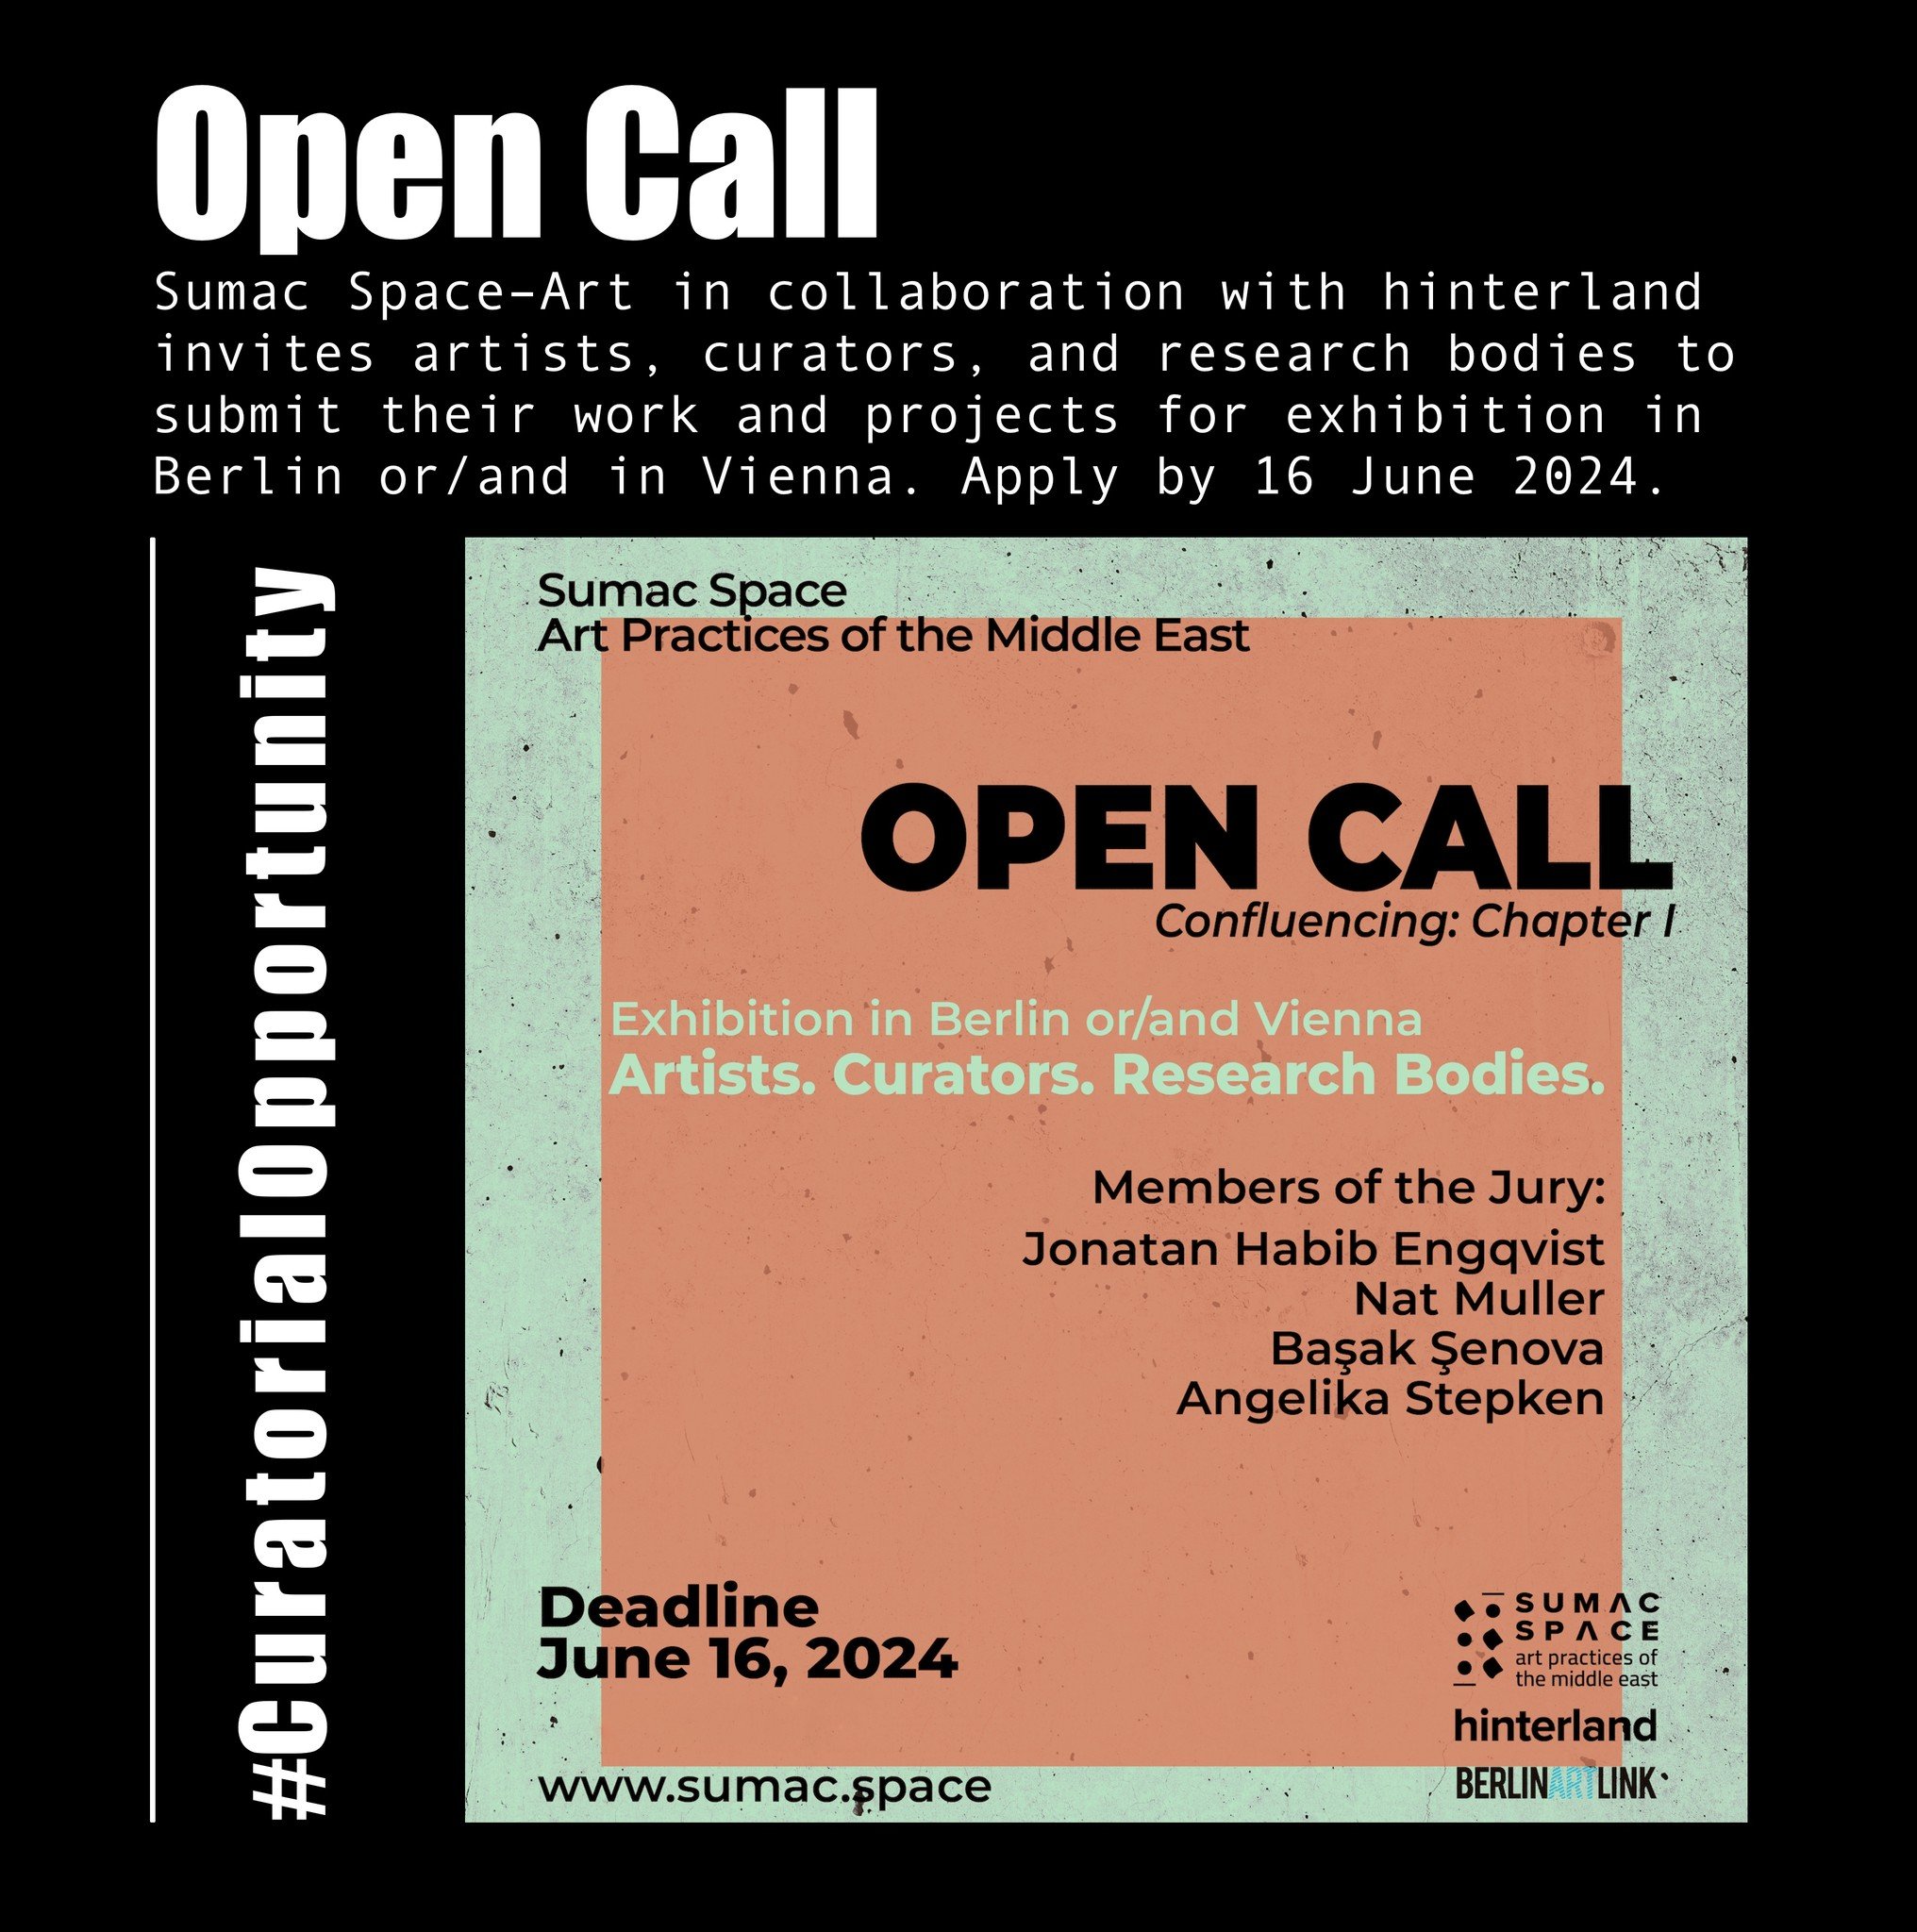 Sumac Space - Art Practices of the Middle East @sumacspace in collaboration with hinterland @hinterlandaustria invites artists, curators, and research bodies who address contemporary urgencies in the context of the challenging socio-political circums